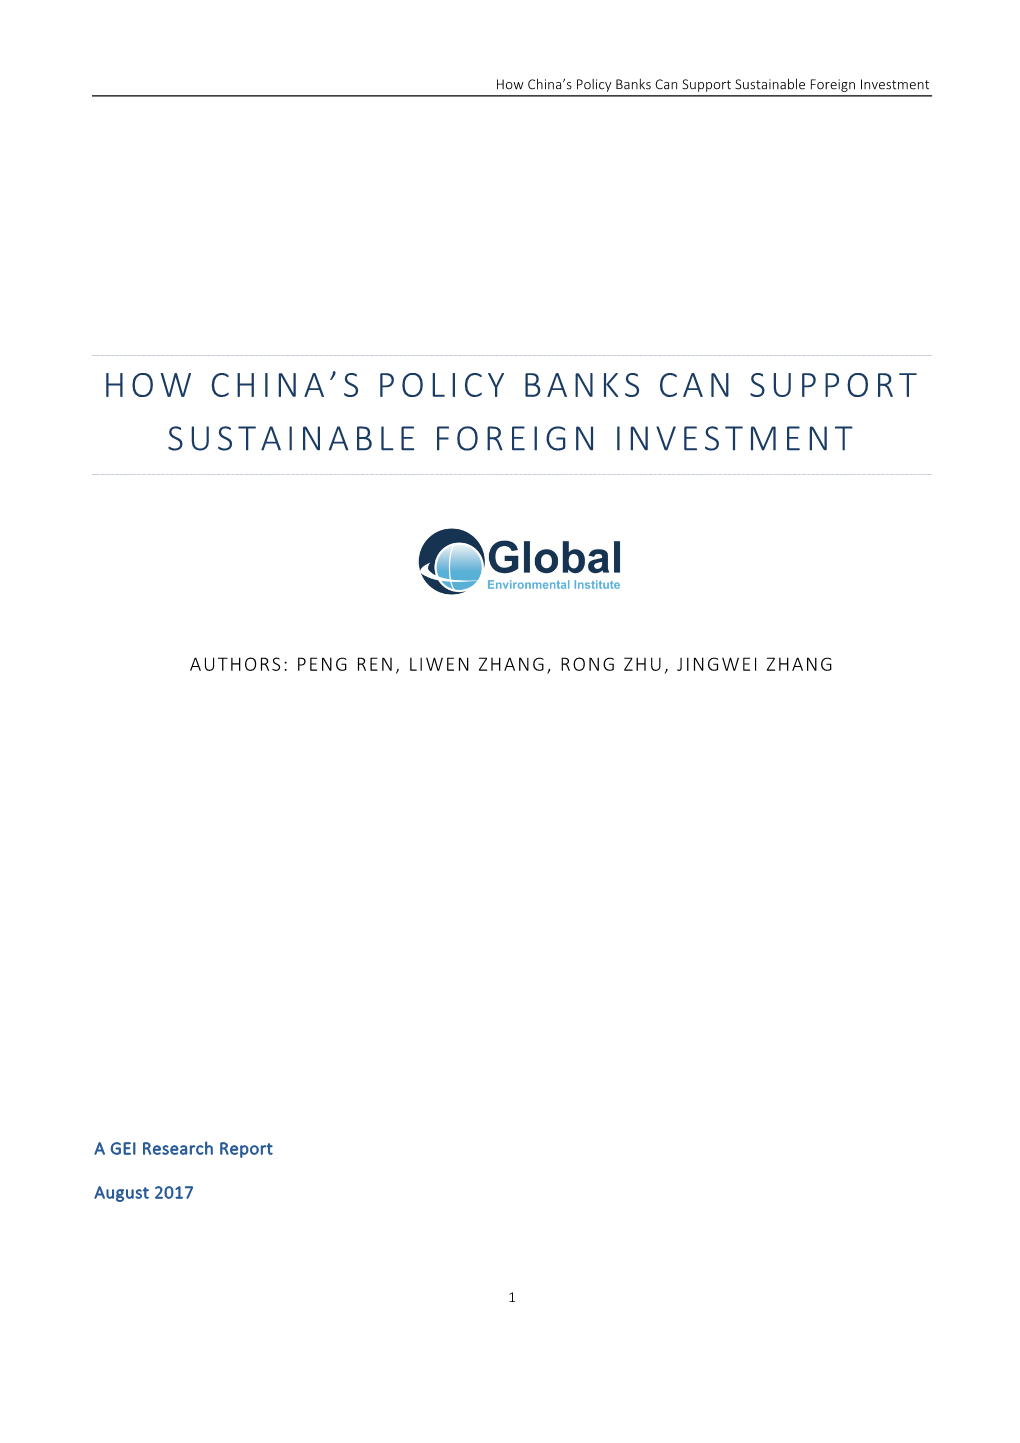 How China's Policy Banks Can Support Sustainable Foreign Investment